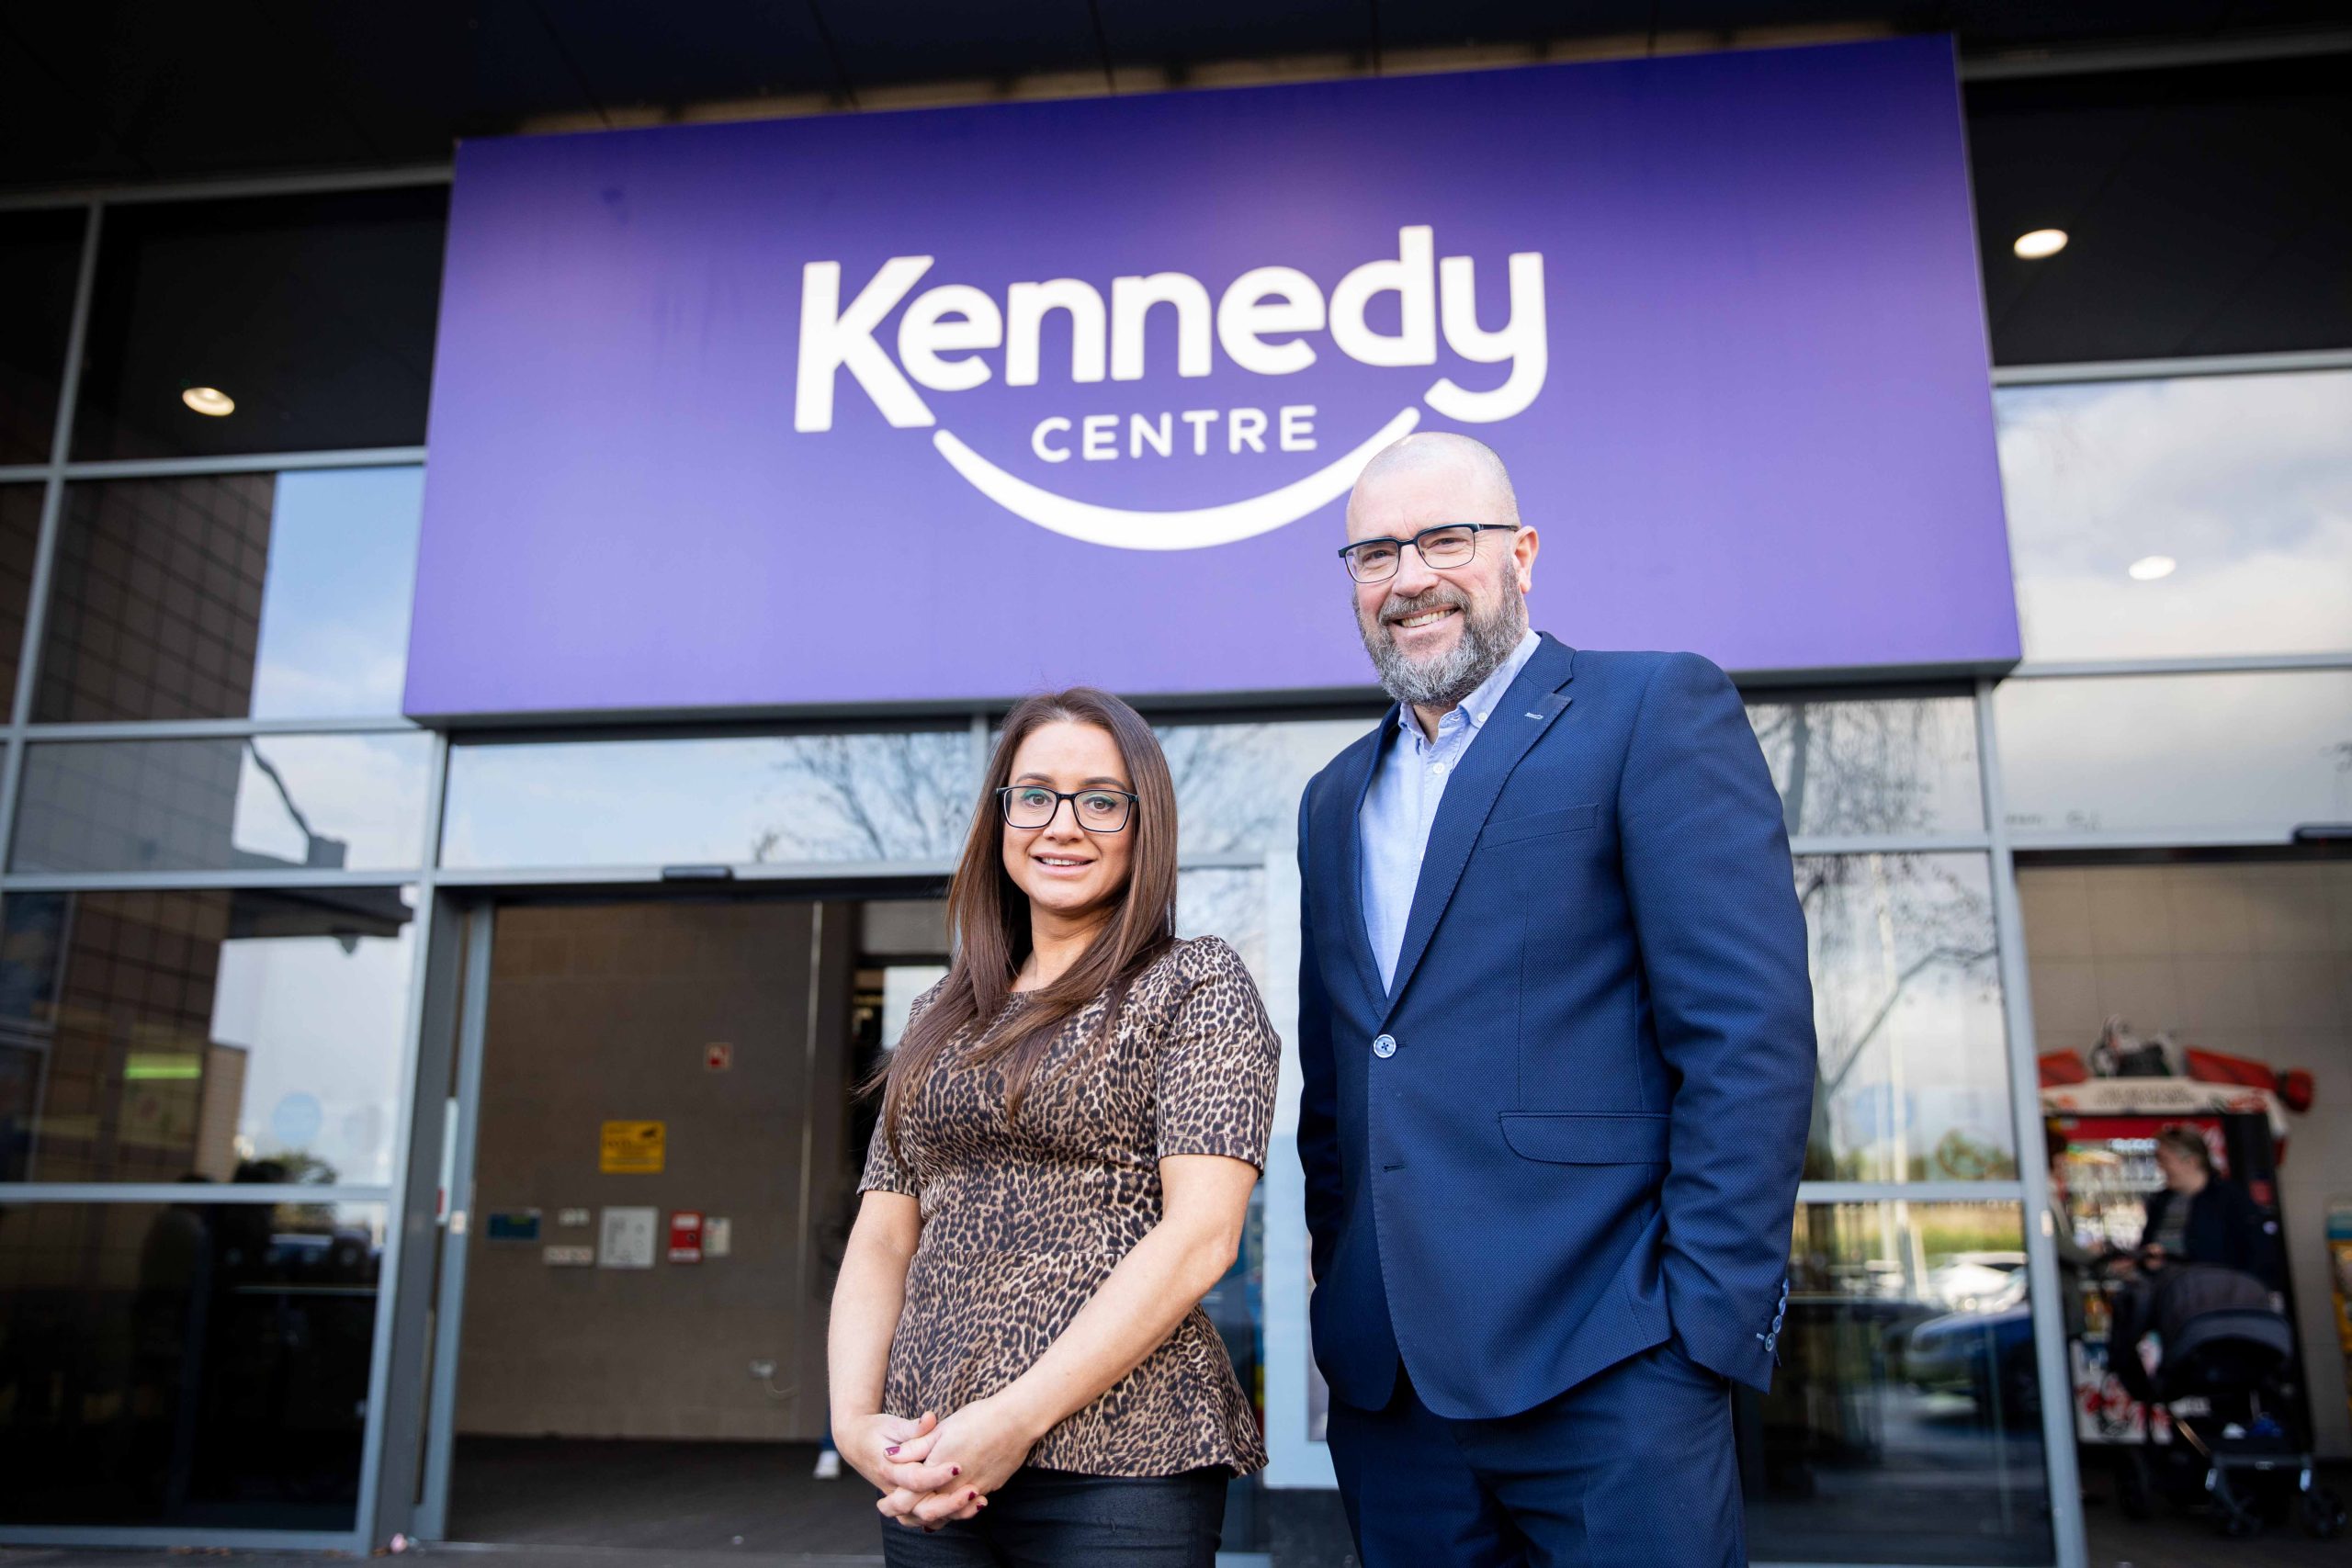 Kennedy Centre Belfast enjoyed footfall increase in 2023 as new tenants arrive